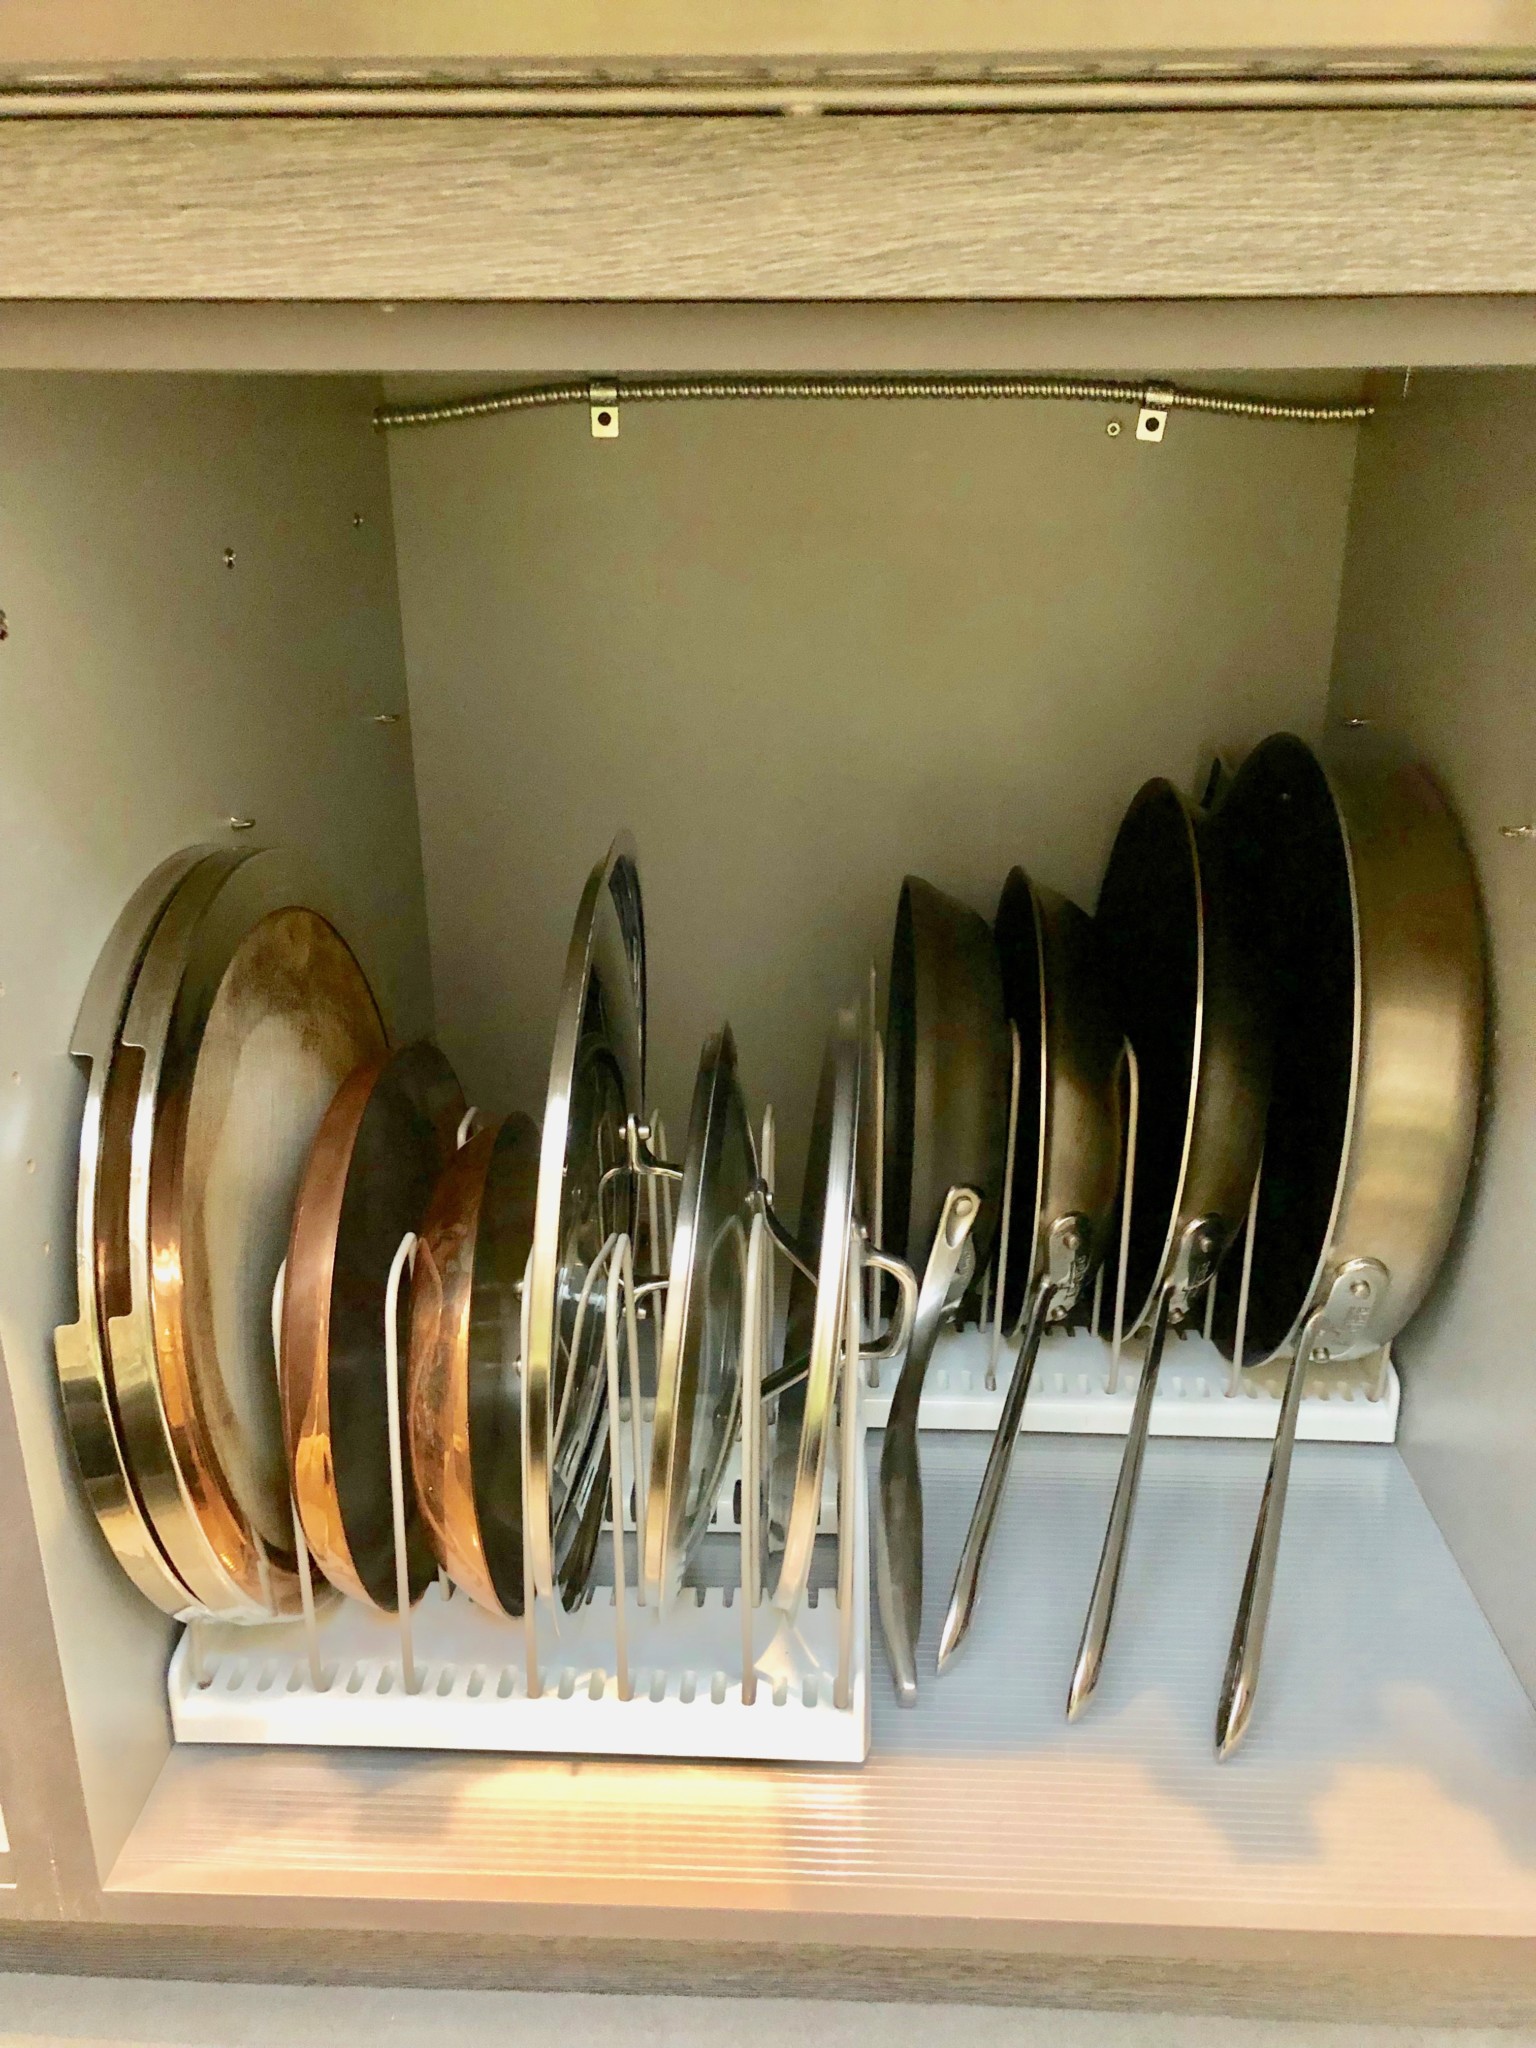 Austin home organizing services - skillets after